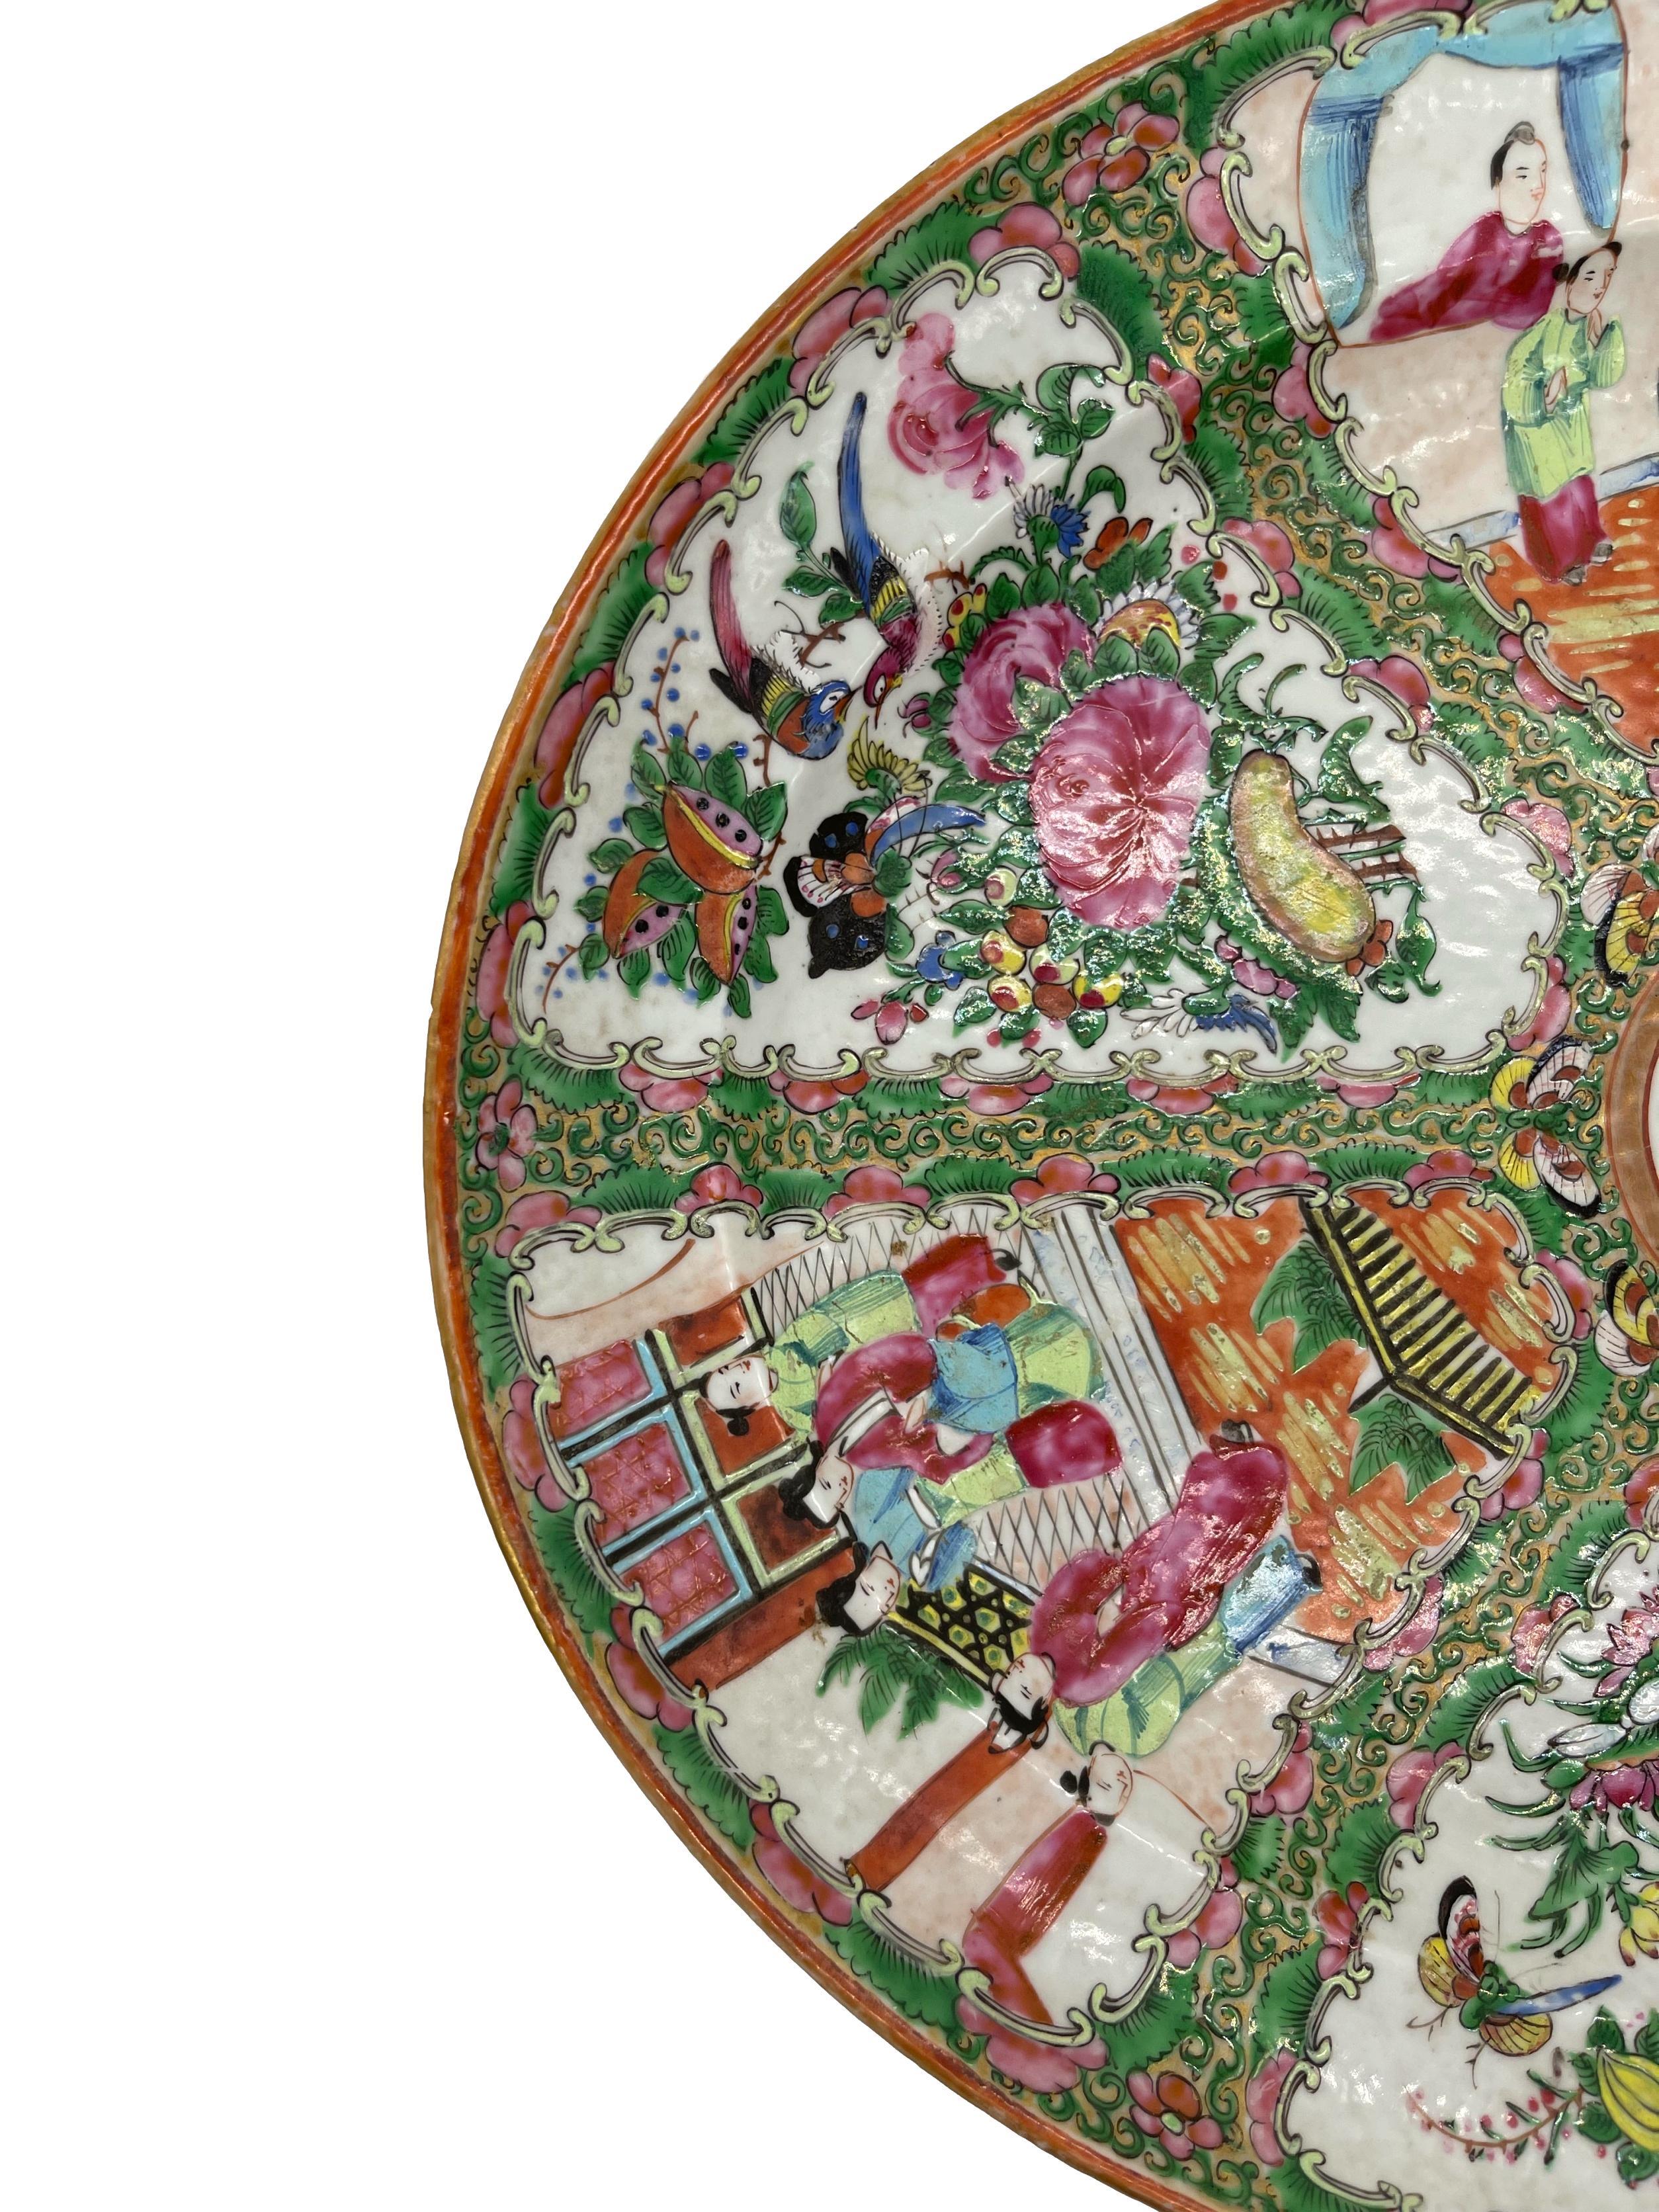 Large Qing Dynasty Famille Rose Medallion platter, Canton c. 1870, polychrome enameled glazes on a hard-paste porcelain body, with 'orange peel' or ju-pi texture, the center medallion with a single multi-colored bird in a floral garden setting,